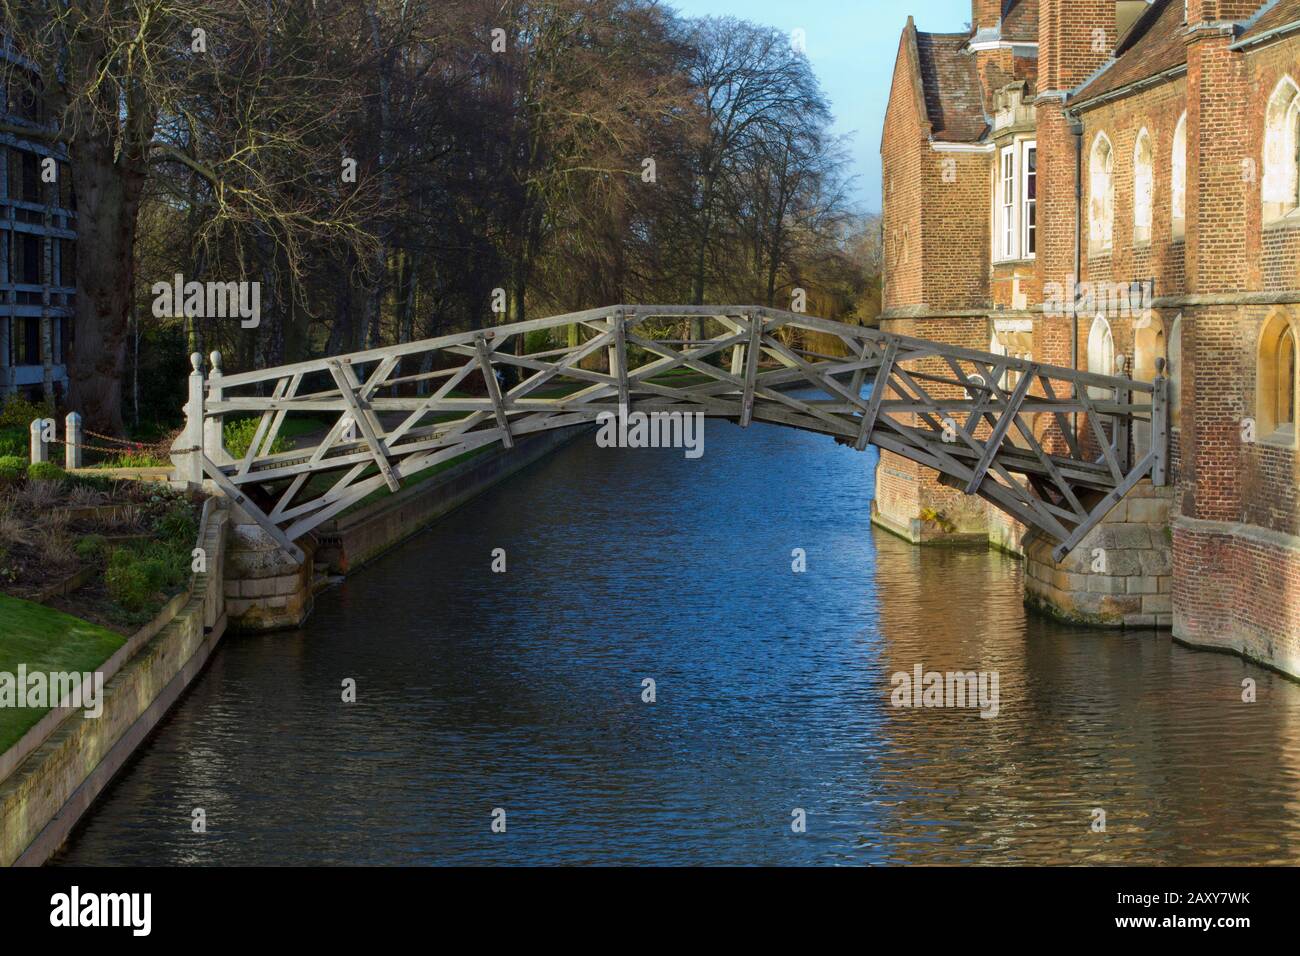 The Mathematical Bridge, a wooden footbridge across the River Cam connecting two parts of Queens College, Cambridge, England Stock Photo